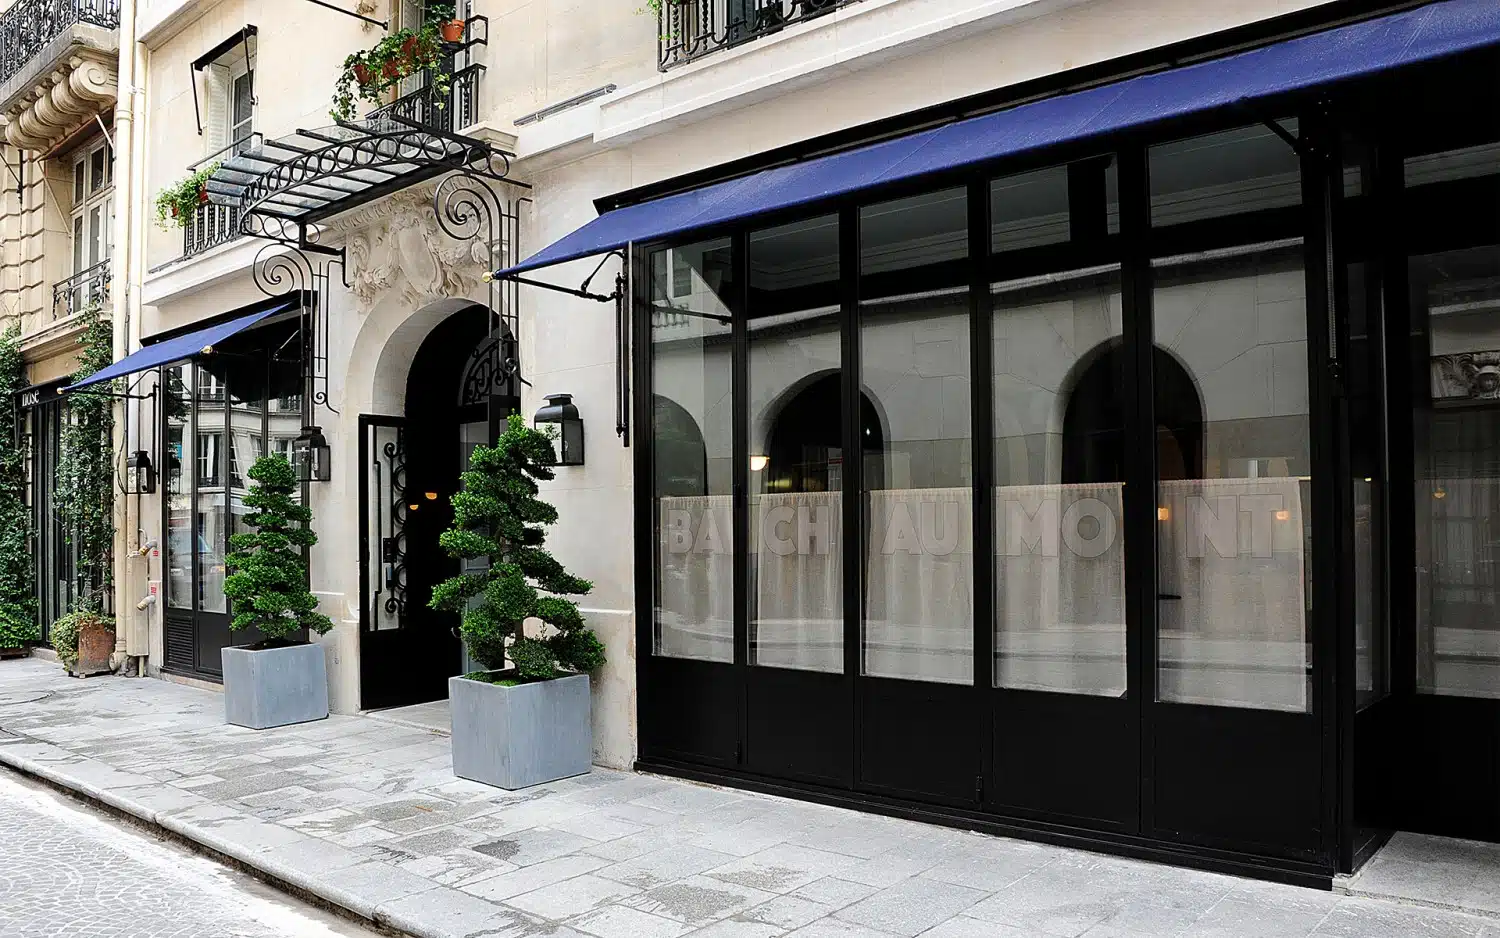 Hotel Bauchamont Paris - One of the best places to stay in Paris